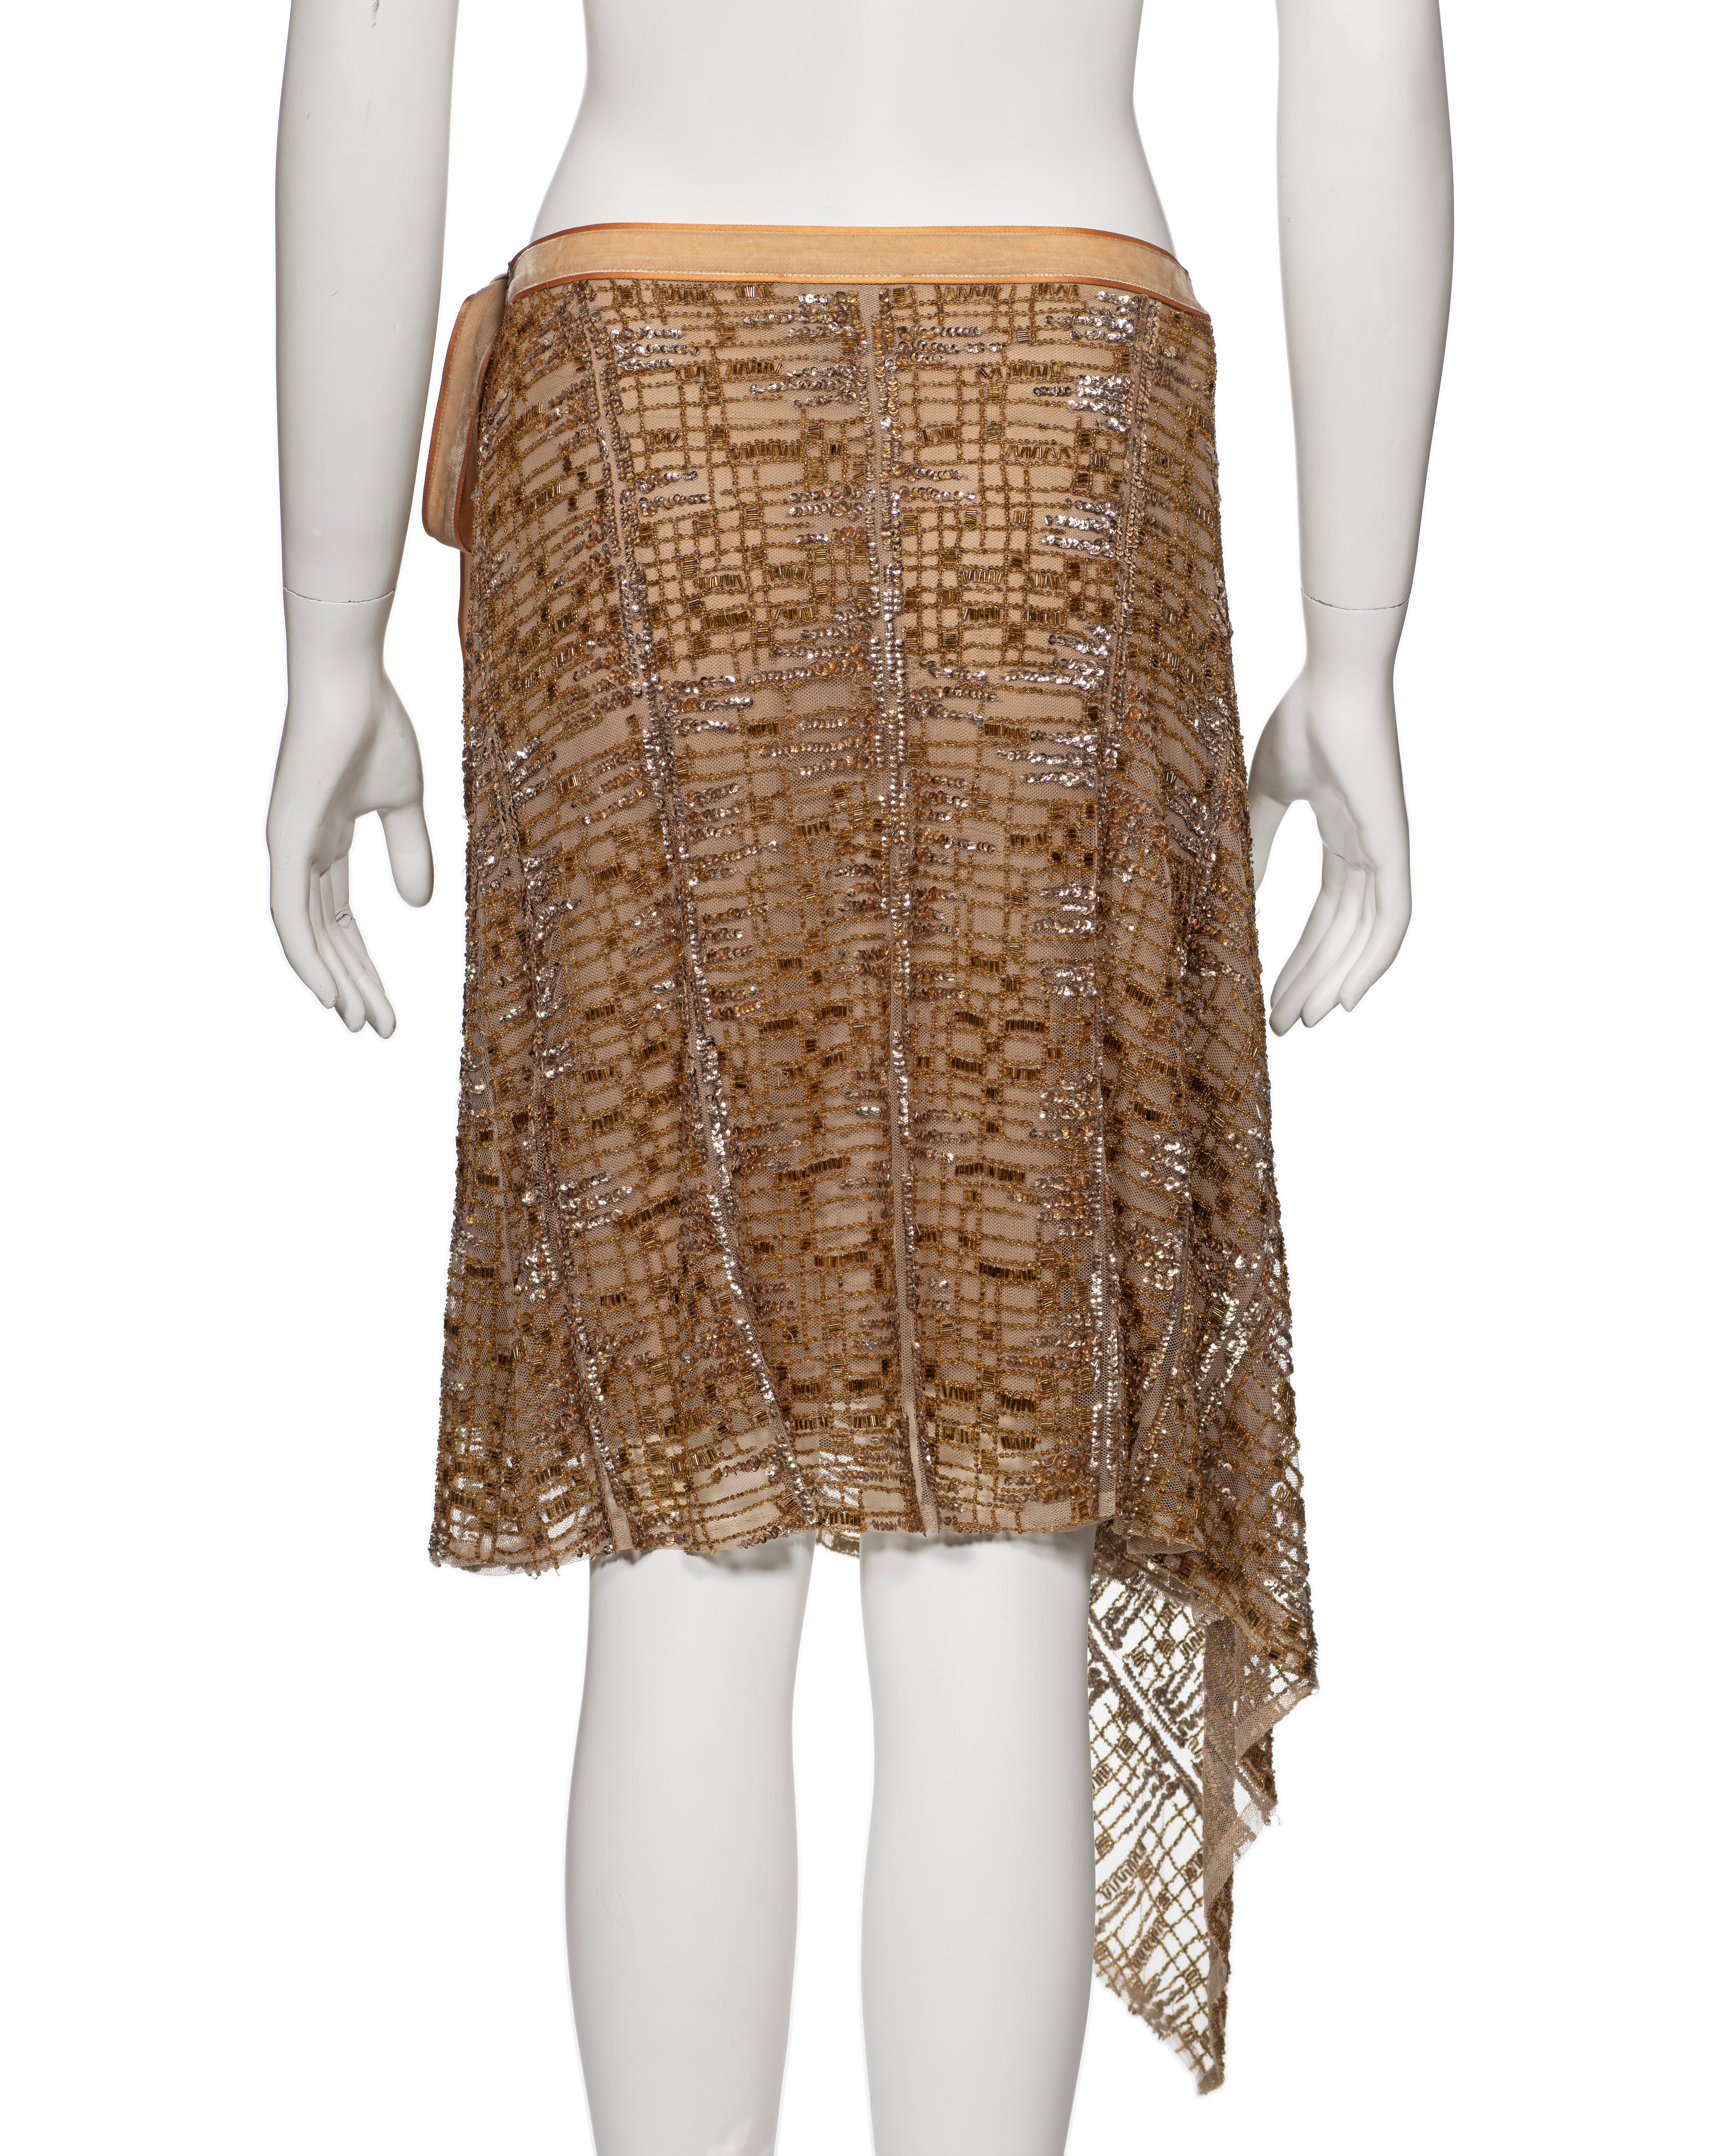 Blumarine by Anna Molinari Copper Beaded and Sequin Mesh Wrap Skirt, FW 2001 For Sale 4